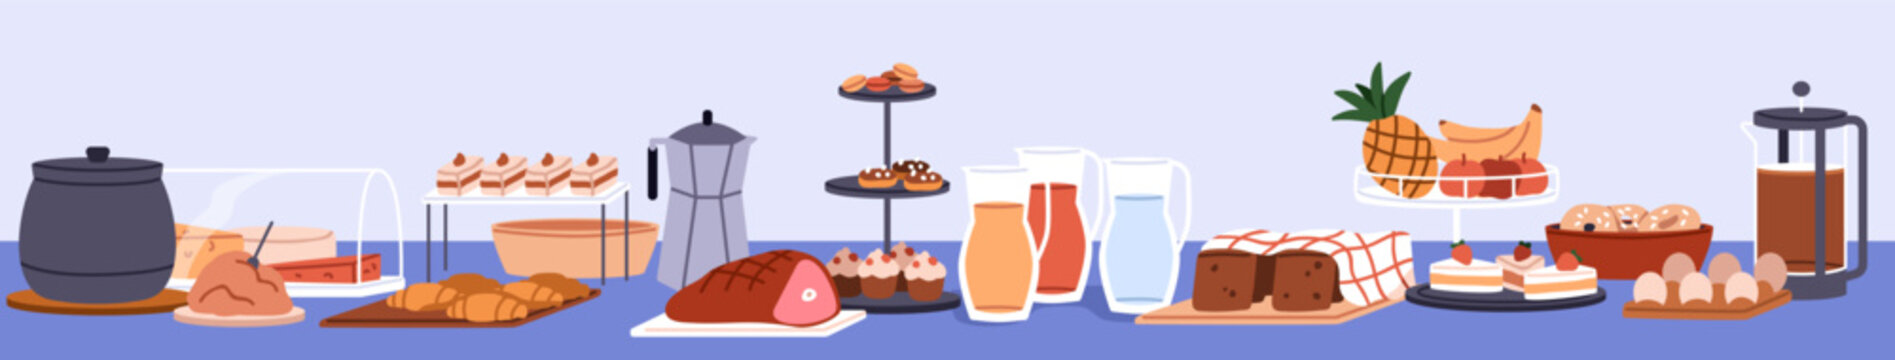 Smorgasbord, buffet-style serving. Food, drinks and desserts for breakfast on table. Hotel lunch with snacks, bakery, fruits, eggs, meat, bread, juice, tea and coffee. Flat vector illustration